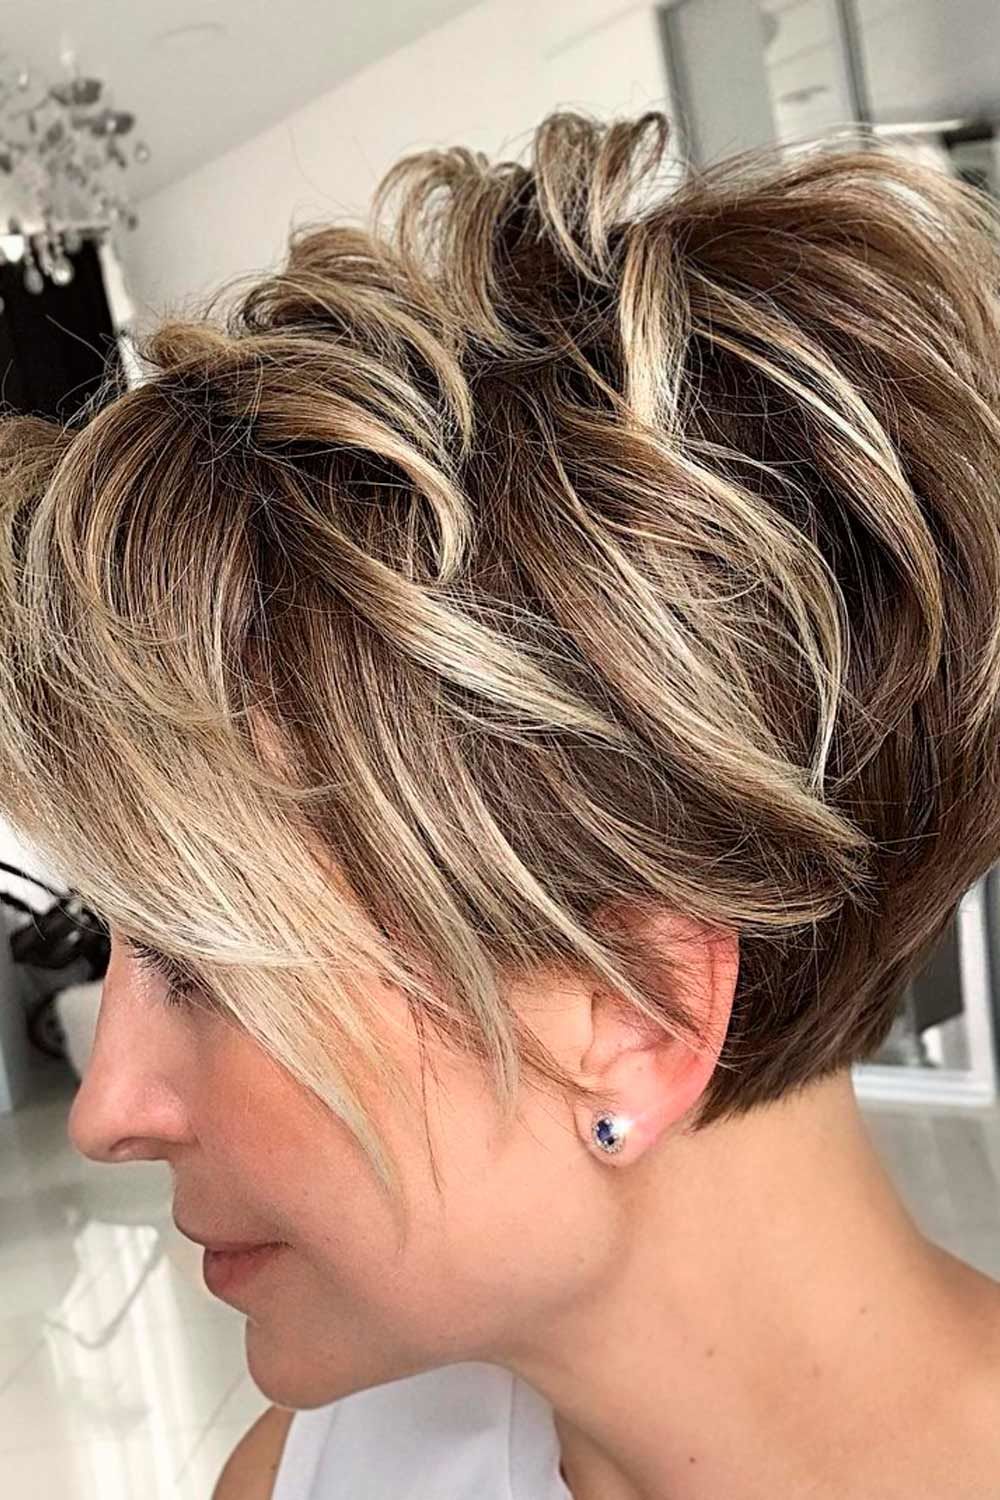 Pictures of short hairstyles for women | Dare to go short